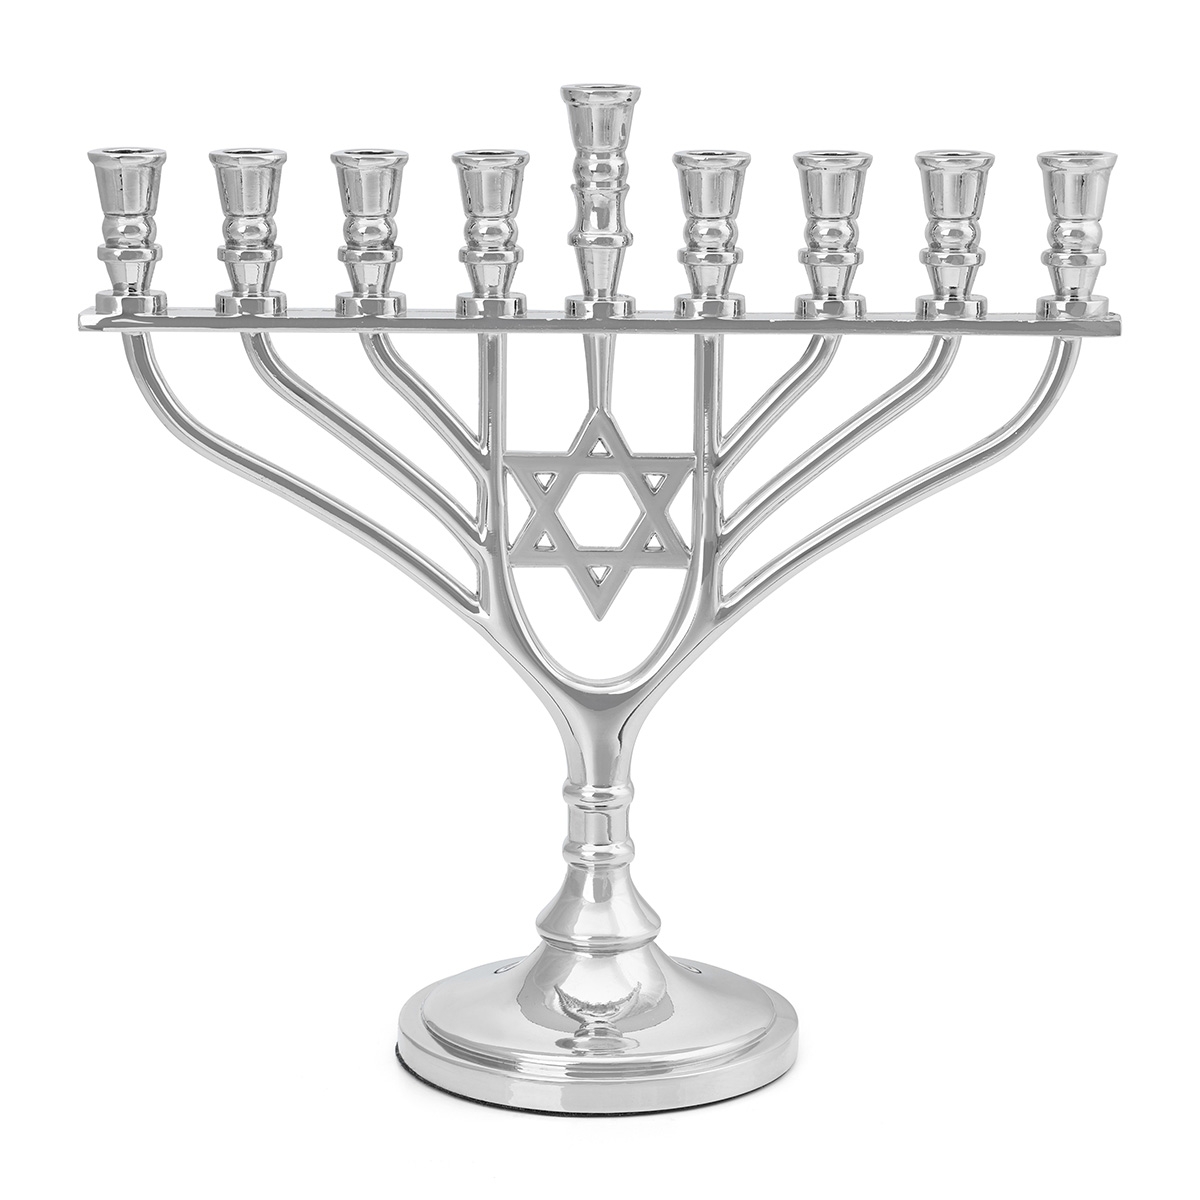 Everything You Need To Know Before Buying A Hanukkah Menorah